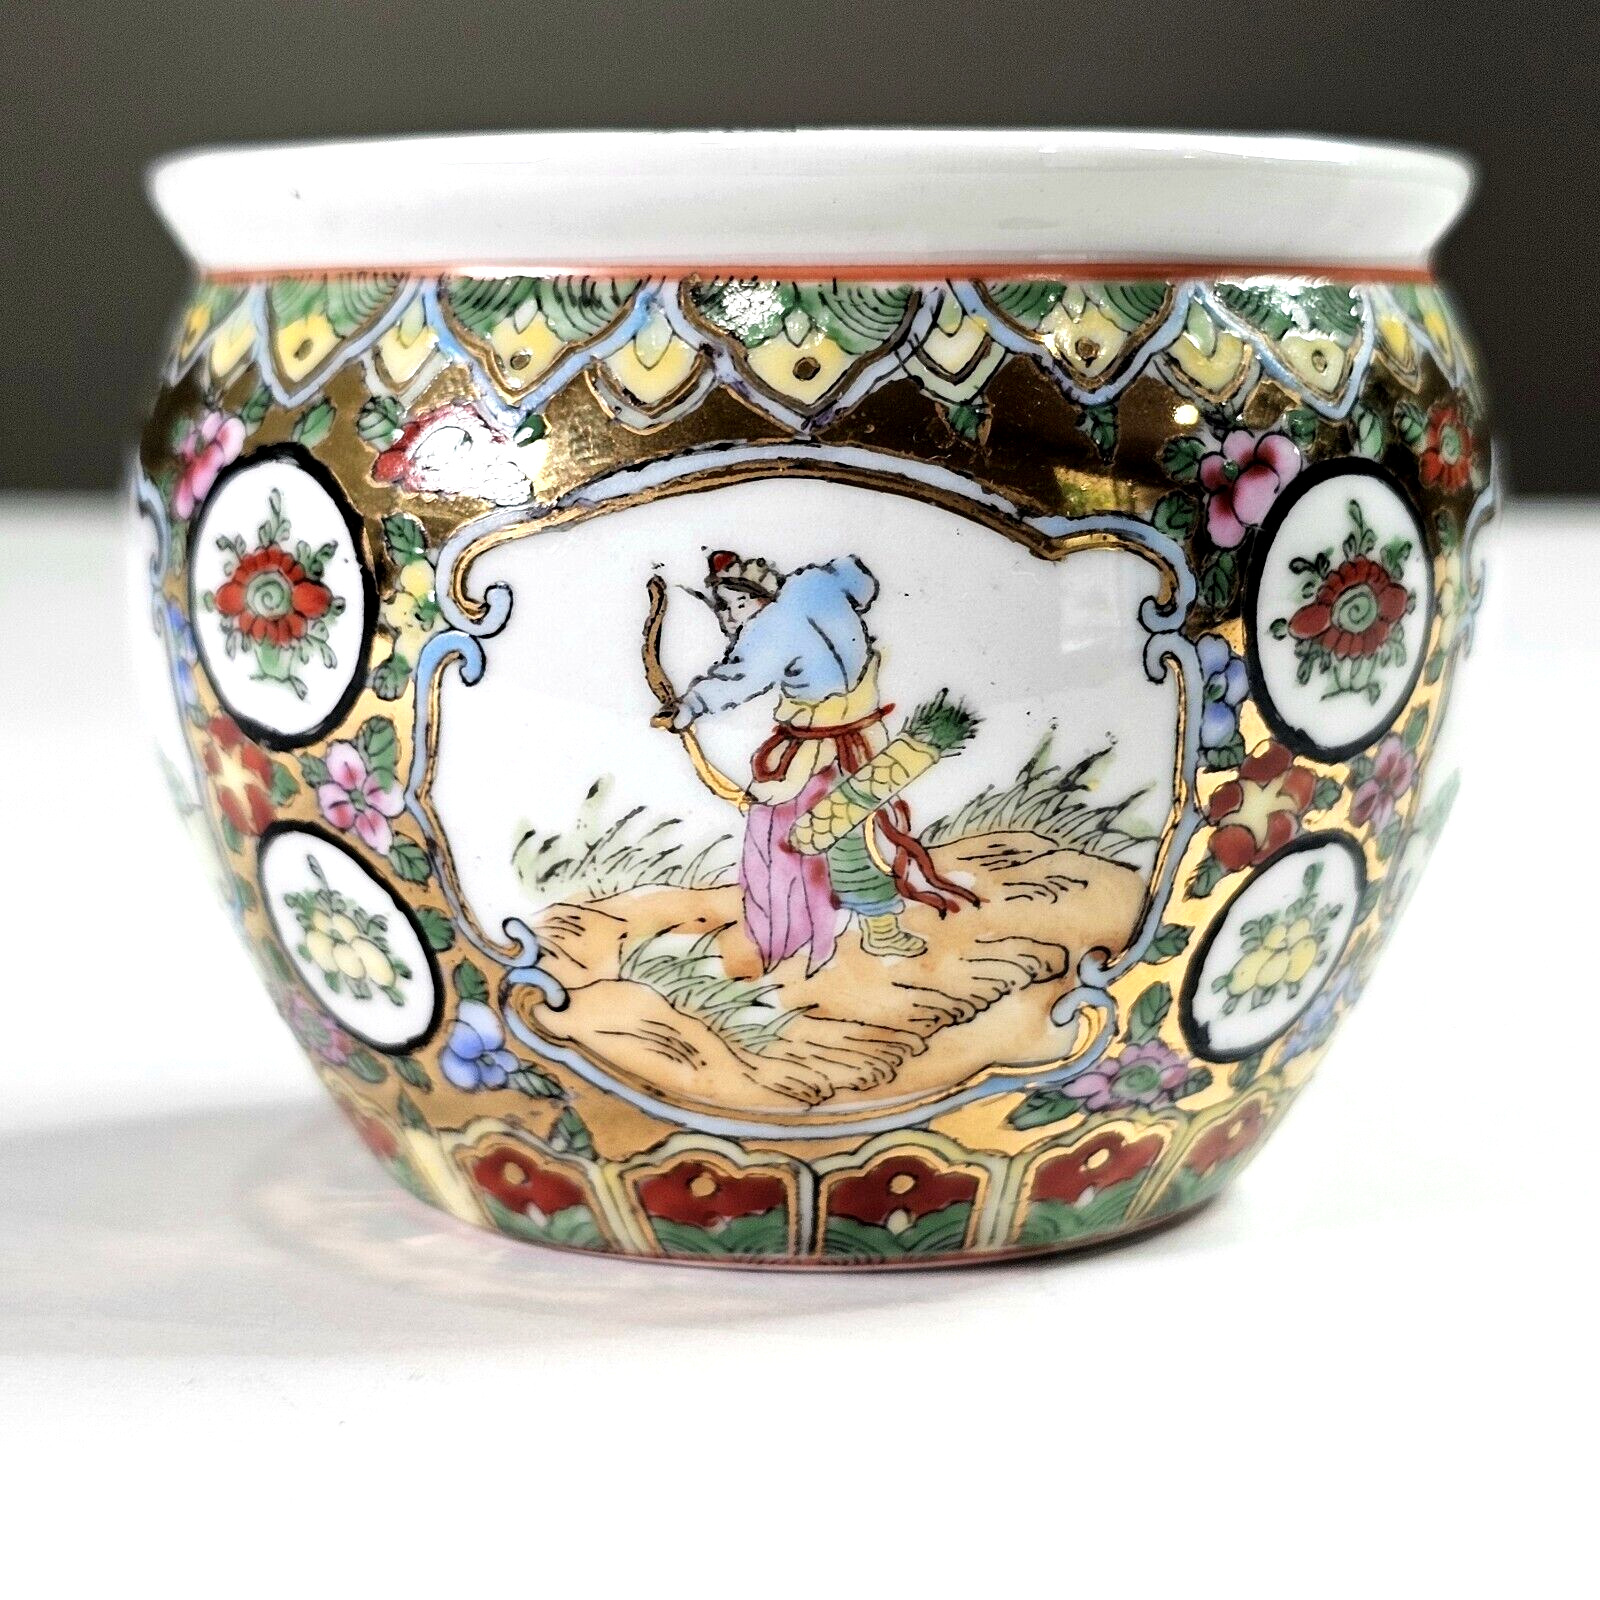 Vintage Chinese souvenir hand-painted eggshell porcelain fishbowl Planter Small